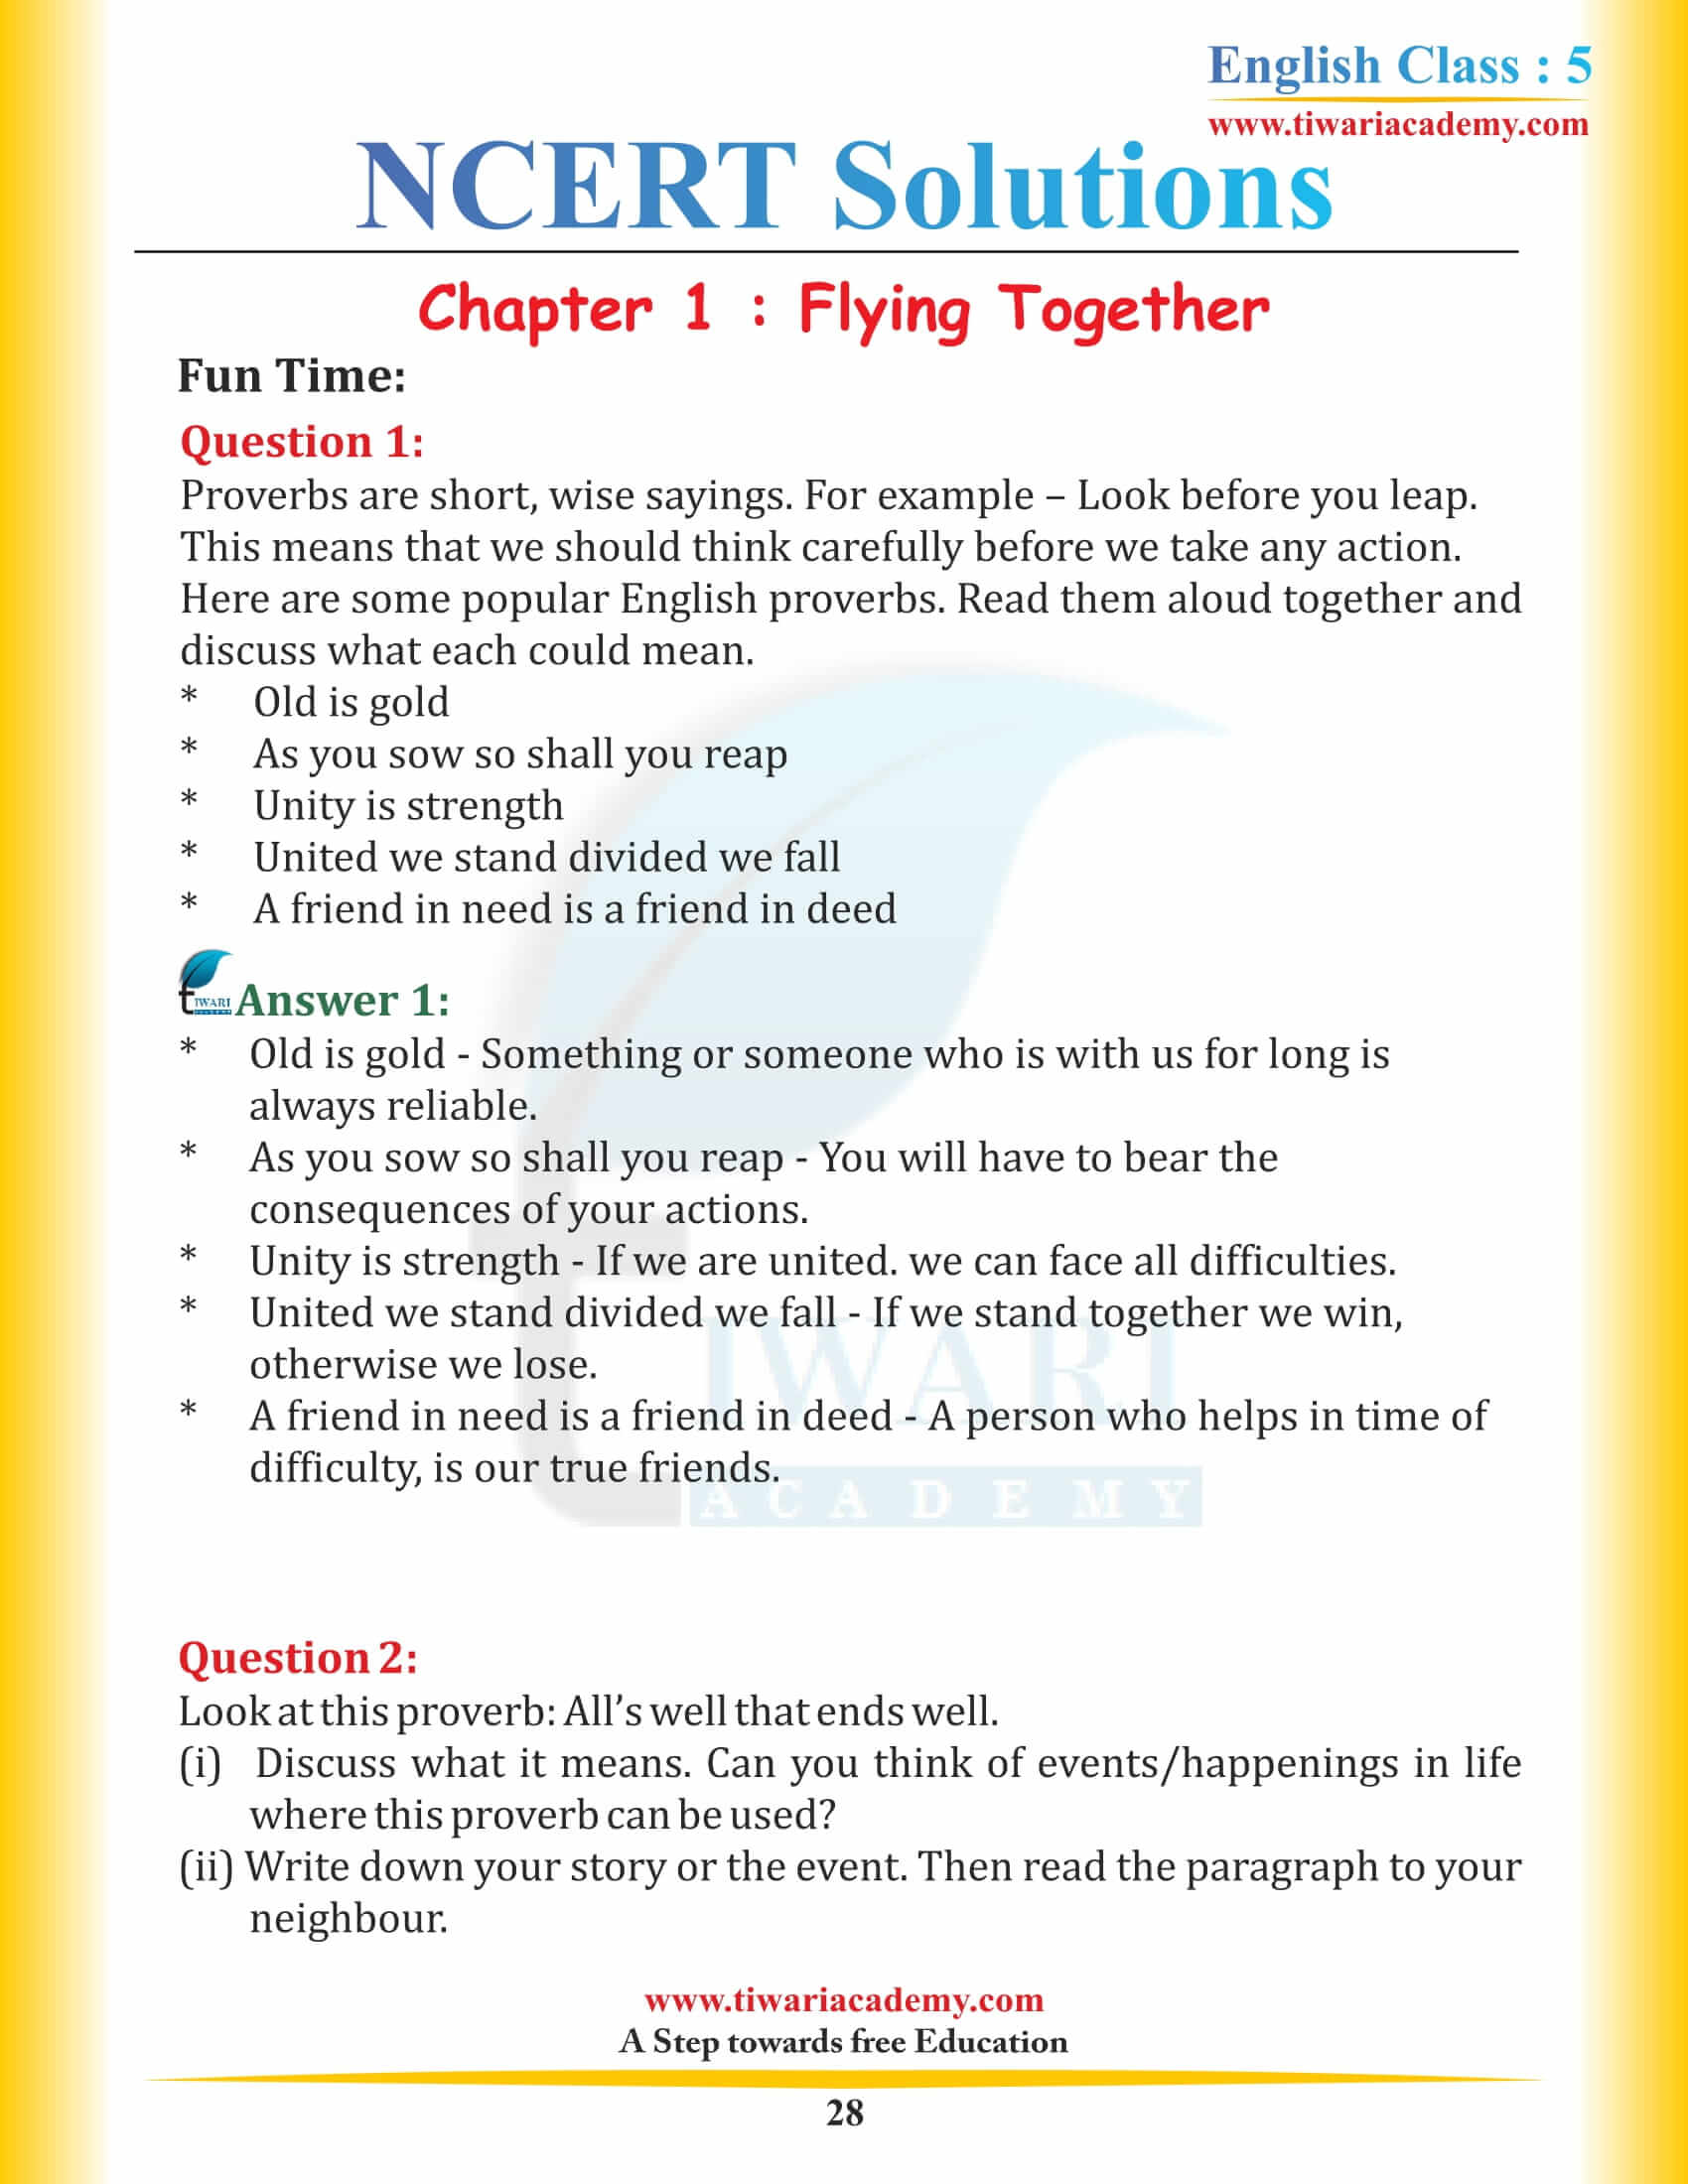 NCERT Class 5 English Chapter 1 Flying Together Solutions